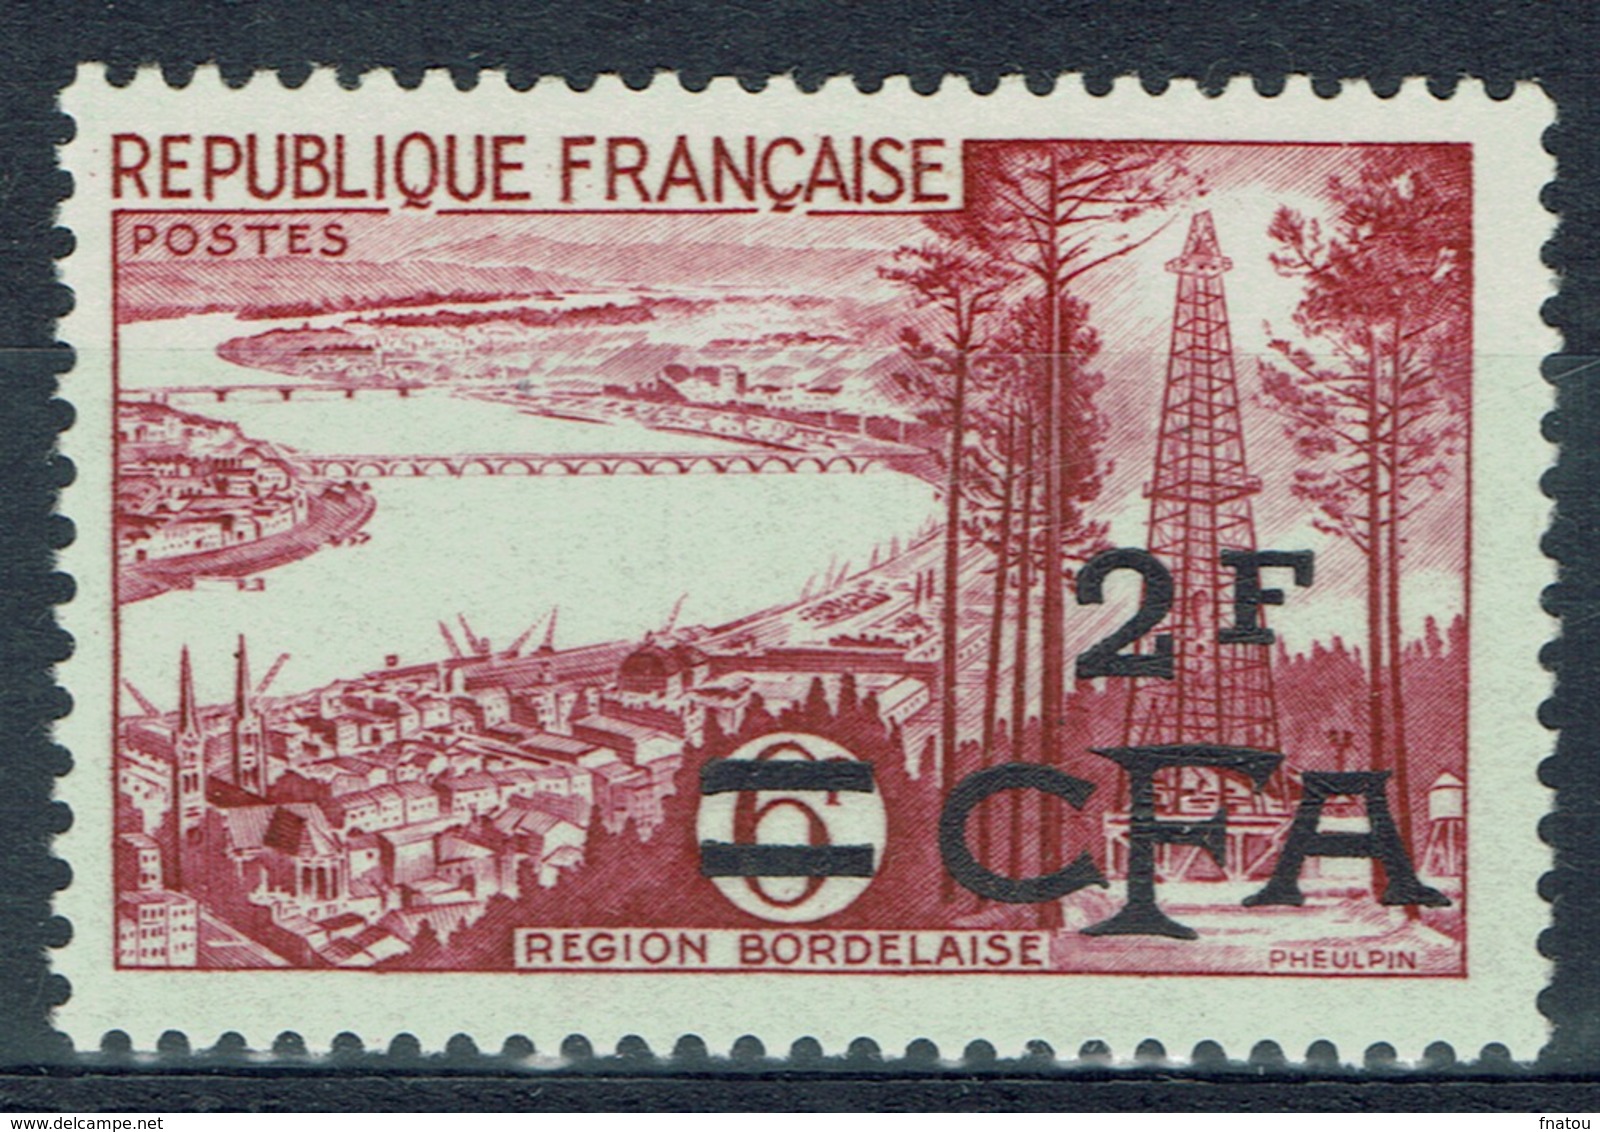 Réunion Island, "Bordeaux", French Stamp Overprint, 1955, MNH VF - Unused Stamps